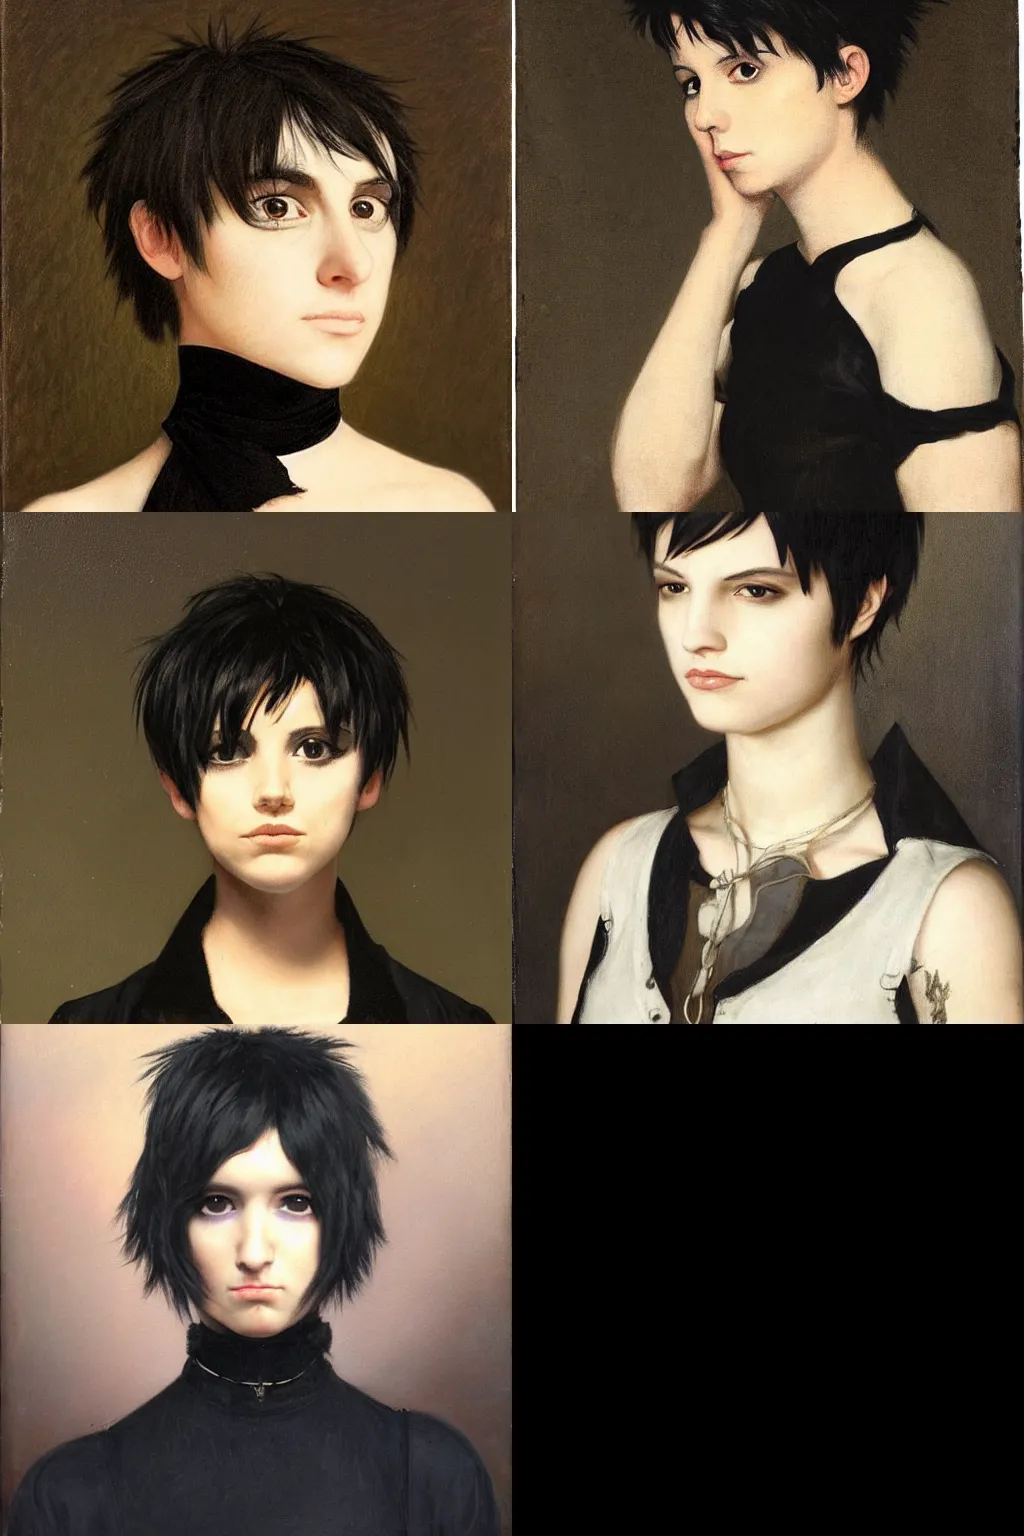 Prompt: an emo portrait by jacques - laurent agasse. her hair is dark brown and cut into a short, messy pixie cut. she has a slightly rounded face, with a pointed chin, large entirely - black eyes, and a small nose. she is wearing a black tank top, a black leather jacket, a black knee - length skirt, and a black choker..